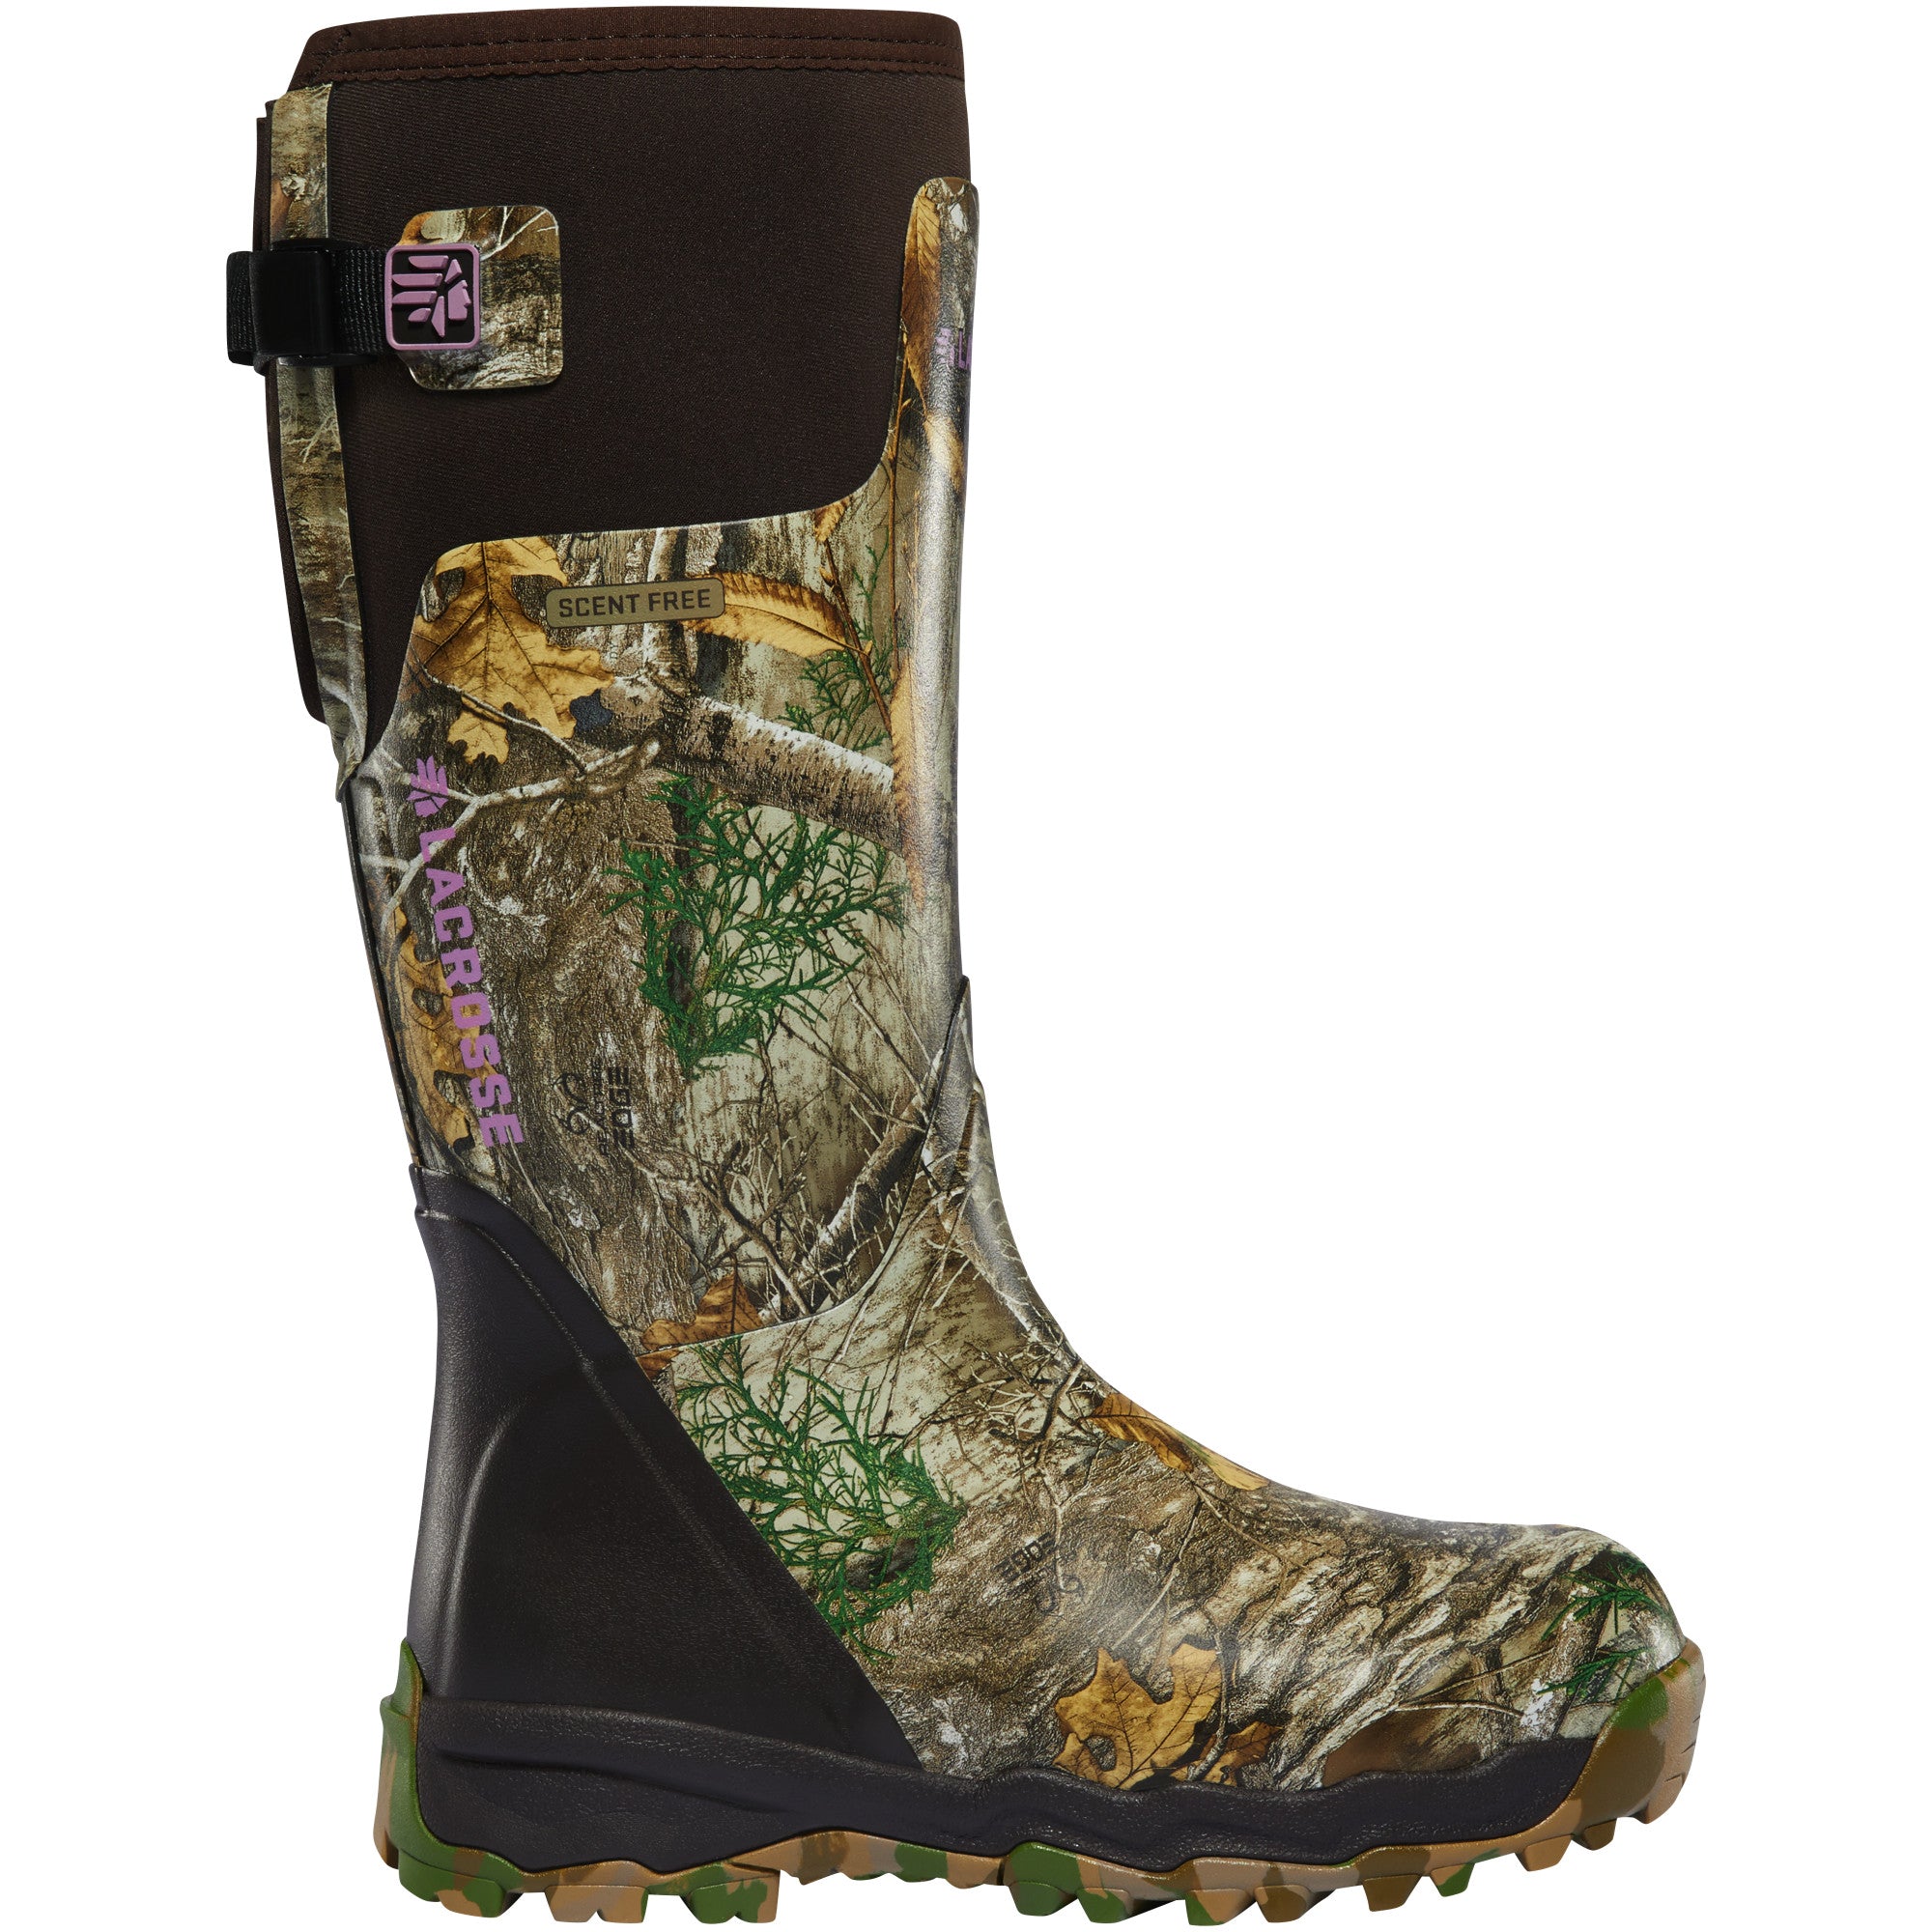 LaCrosse Women's Alphaburly Pro 15" Waterproof Hunting Boot in Realtree Edge from the side